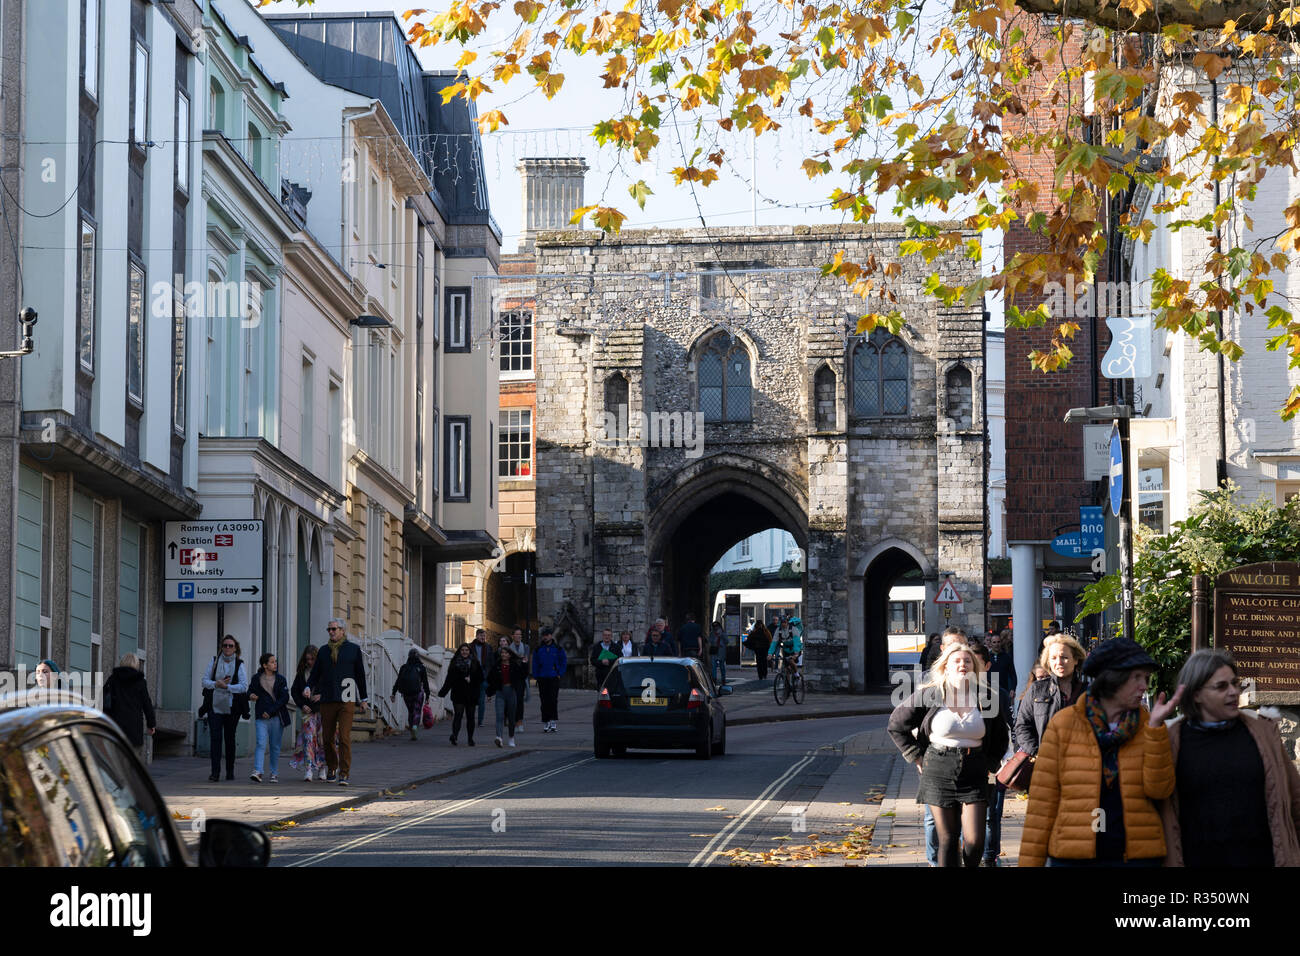 The Westgate Museum in Winchester - Medieval gates front this ancient Tudor & Stuart building with exhibits in a former debtor's prison. Autumn, UK Stock Photo